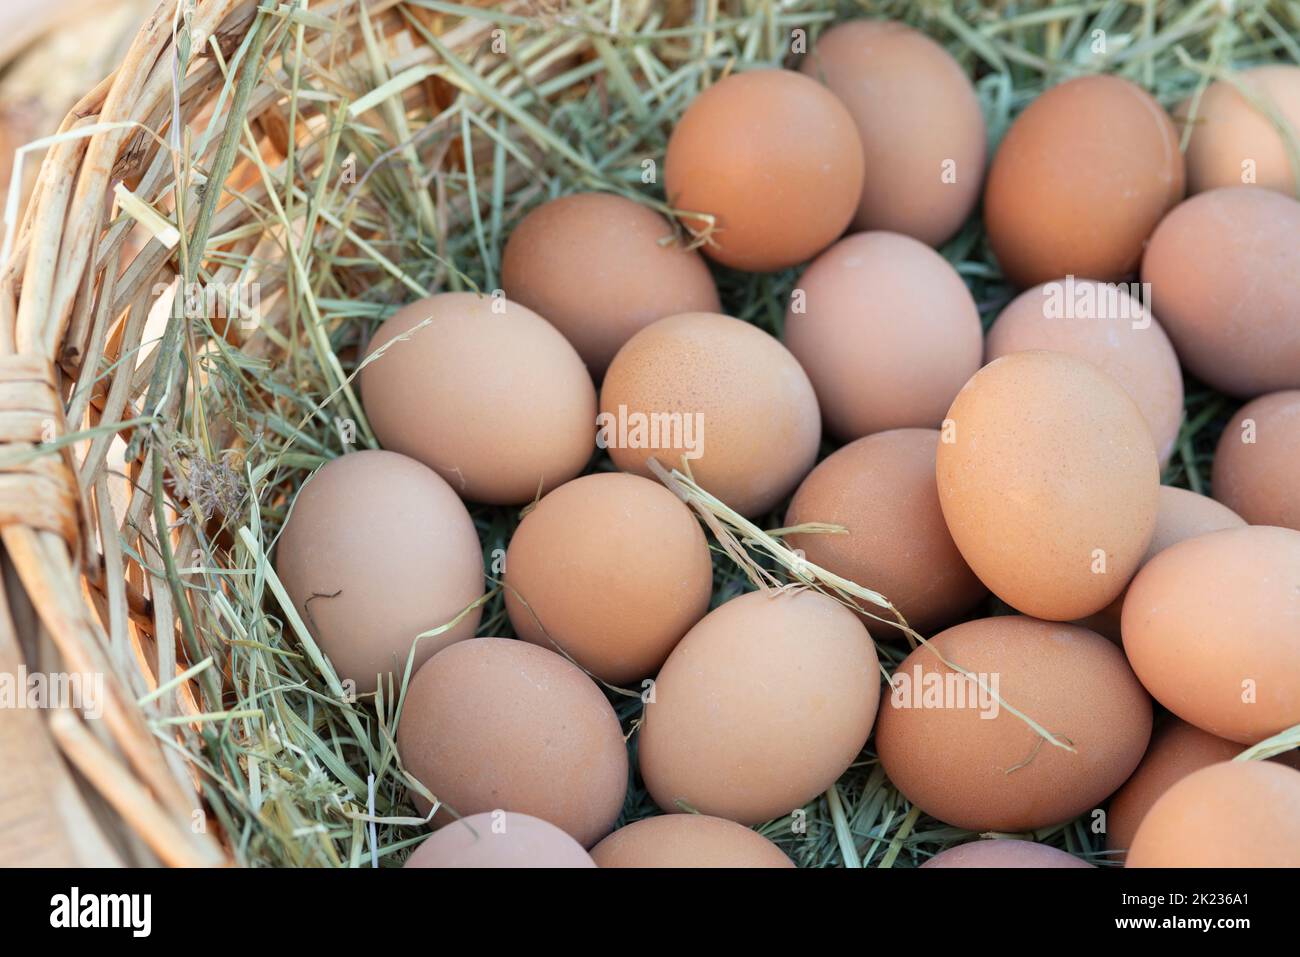 Italy, Lombardy, Baked Eggs in the Basket With Hay Stock Photo